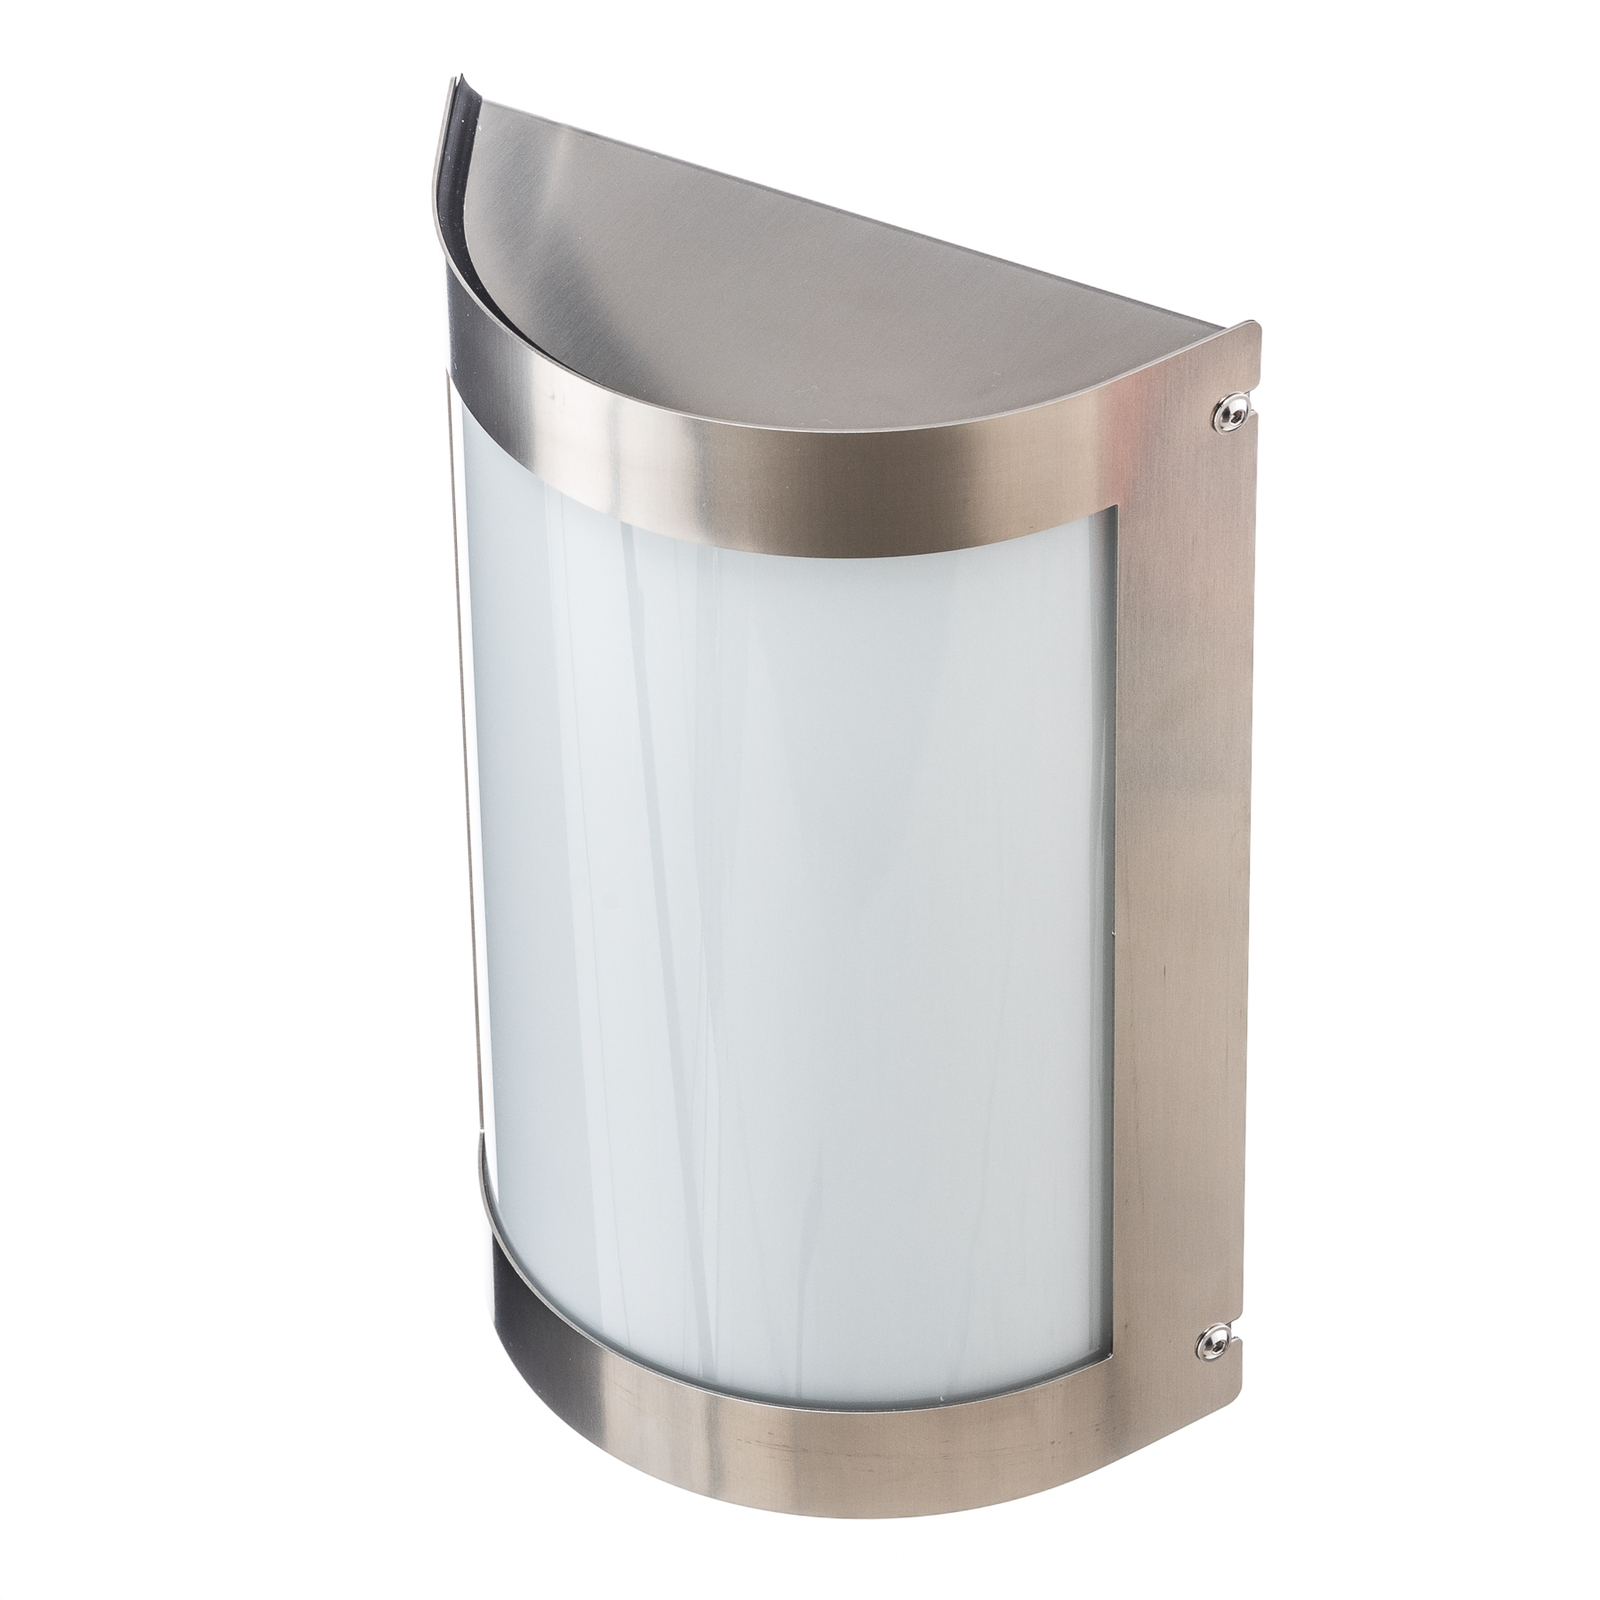 Marco3 outdoor wall light made of stainless steel